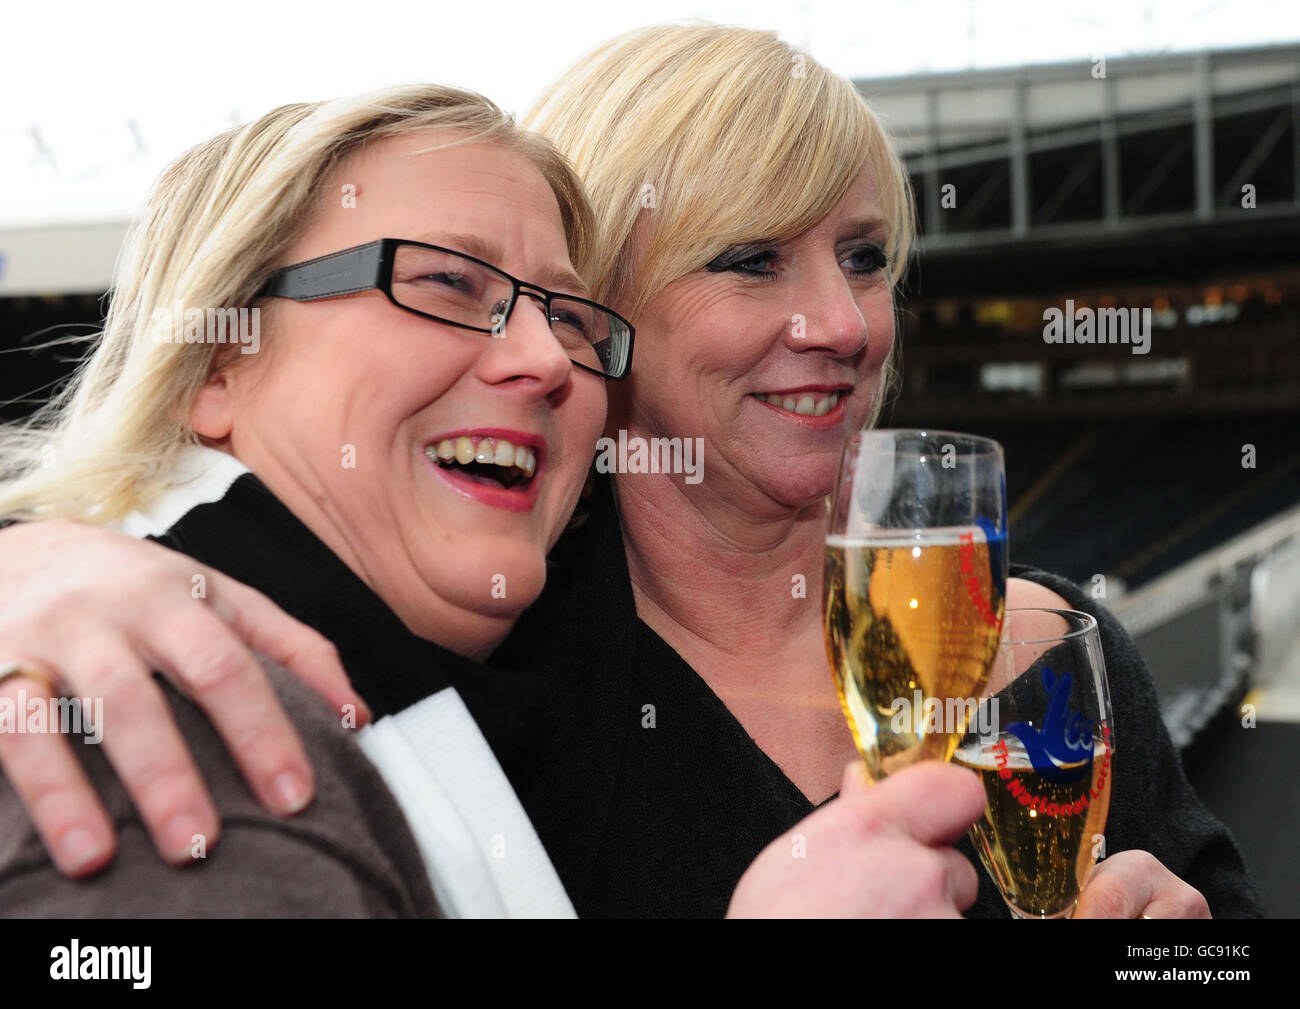 Lottery syndicate winners Pat Dale, 45, (right) and Julie McGregor at St James Park after the six members scooped a 10 million jackpot. Stock Photo